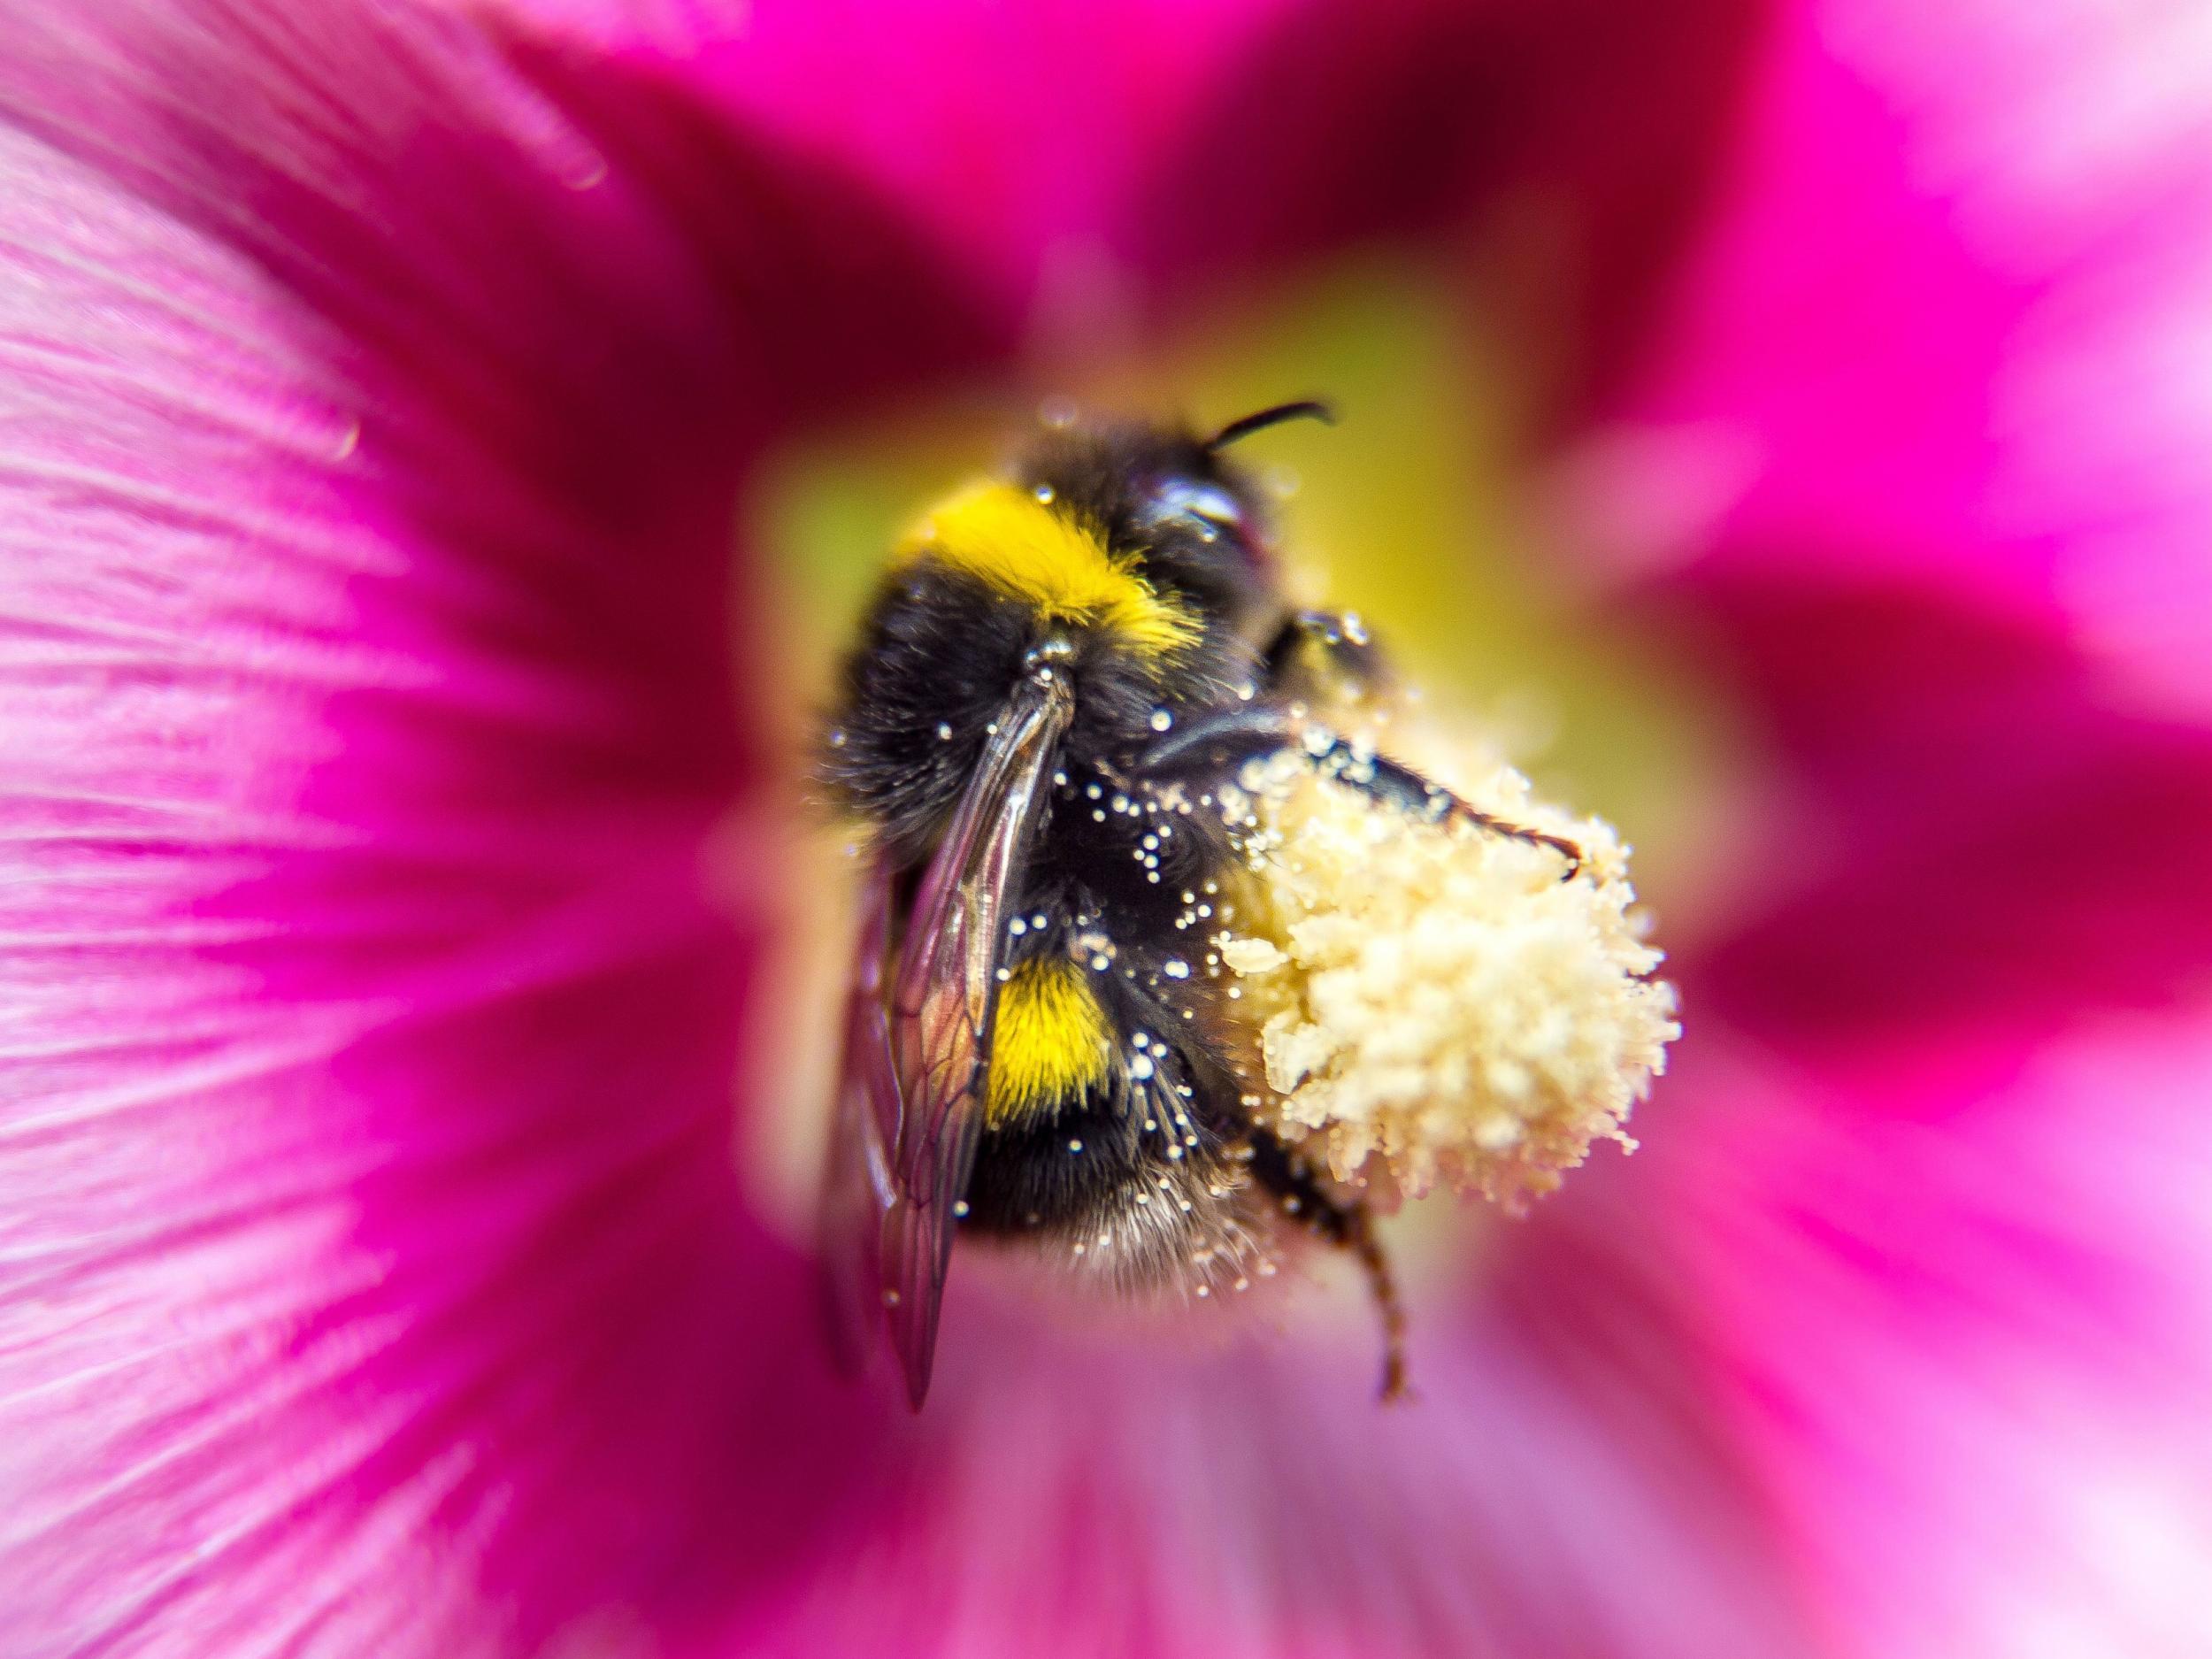 Neonic pesticides are damaging the bee population, which has an effect on our delicate ecosystem